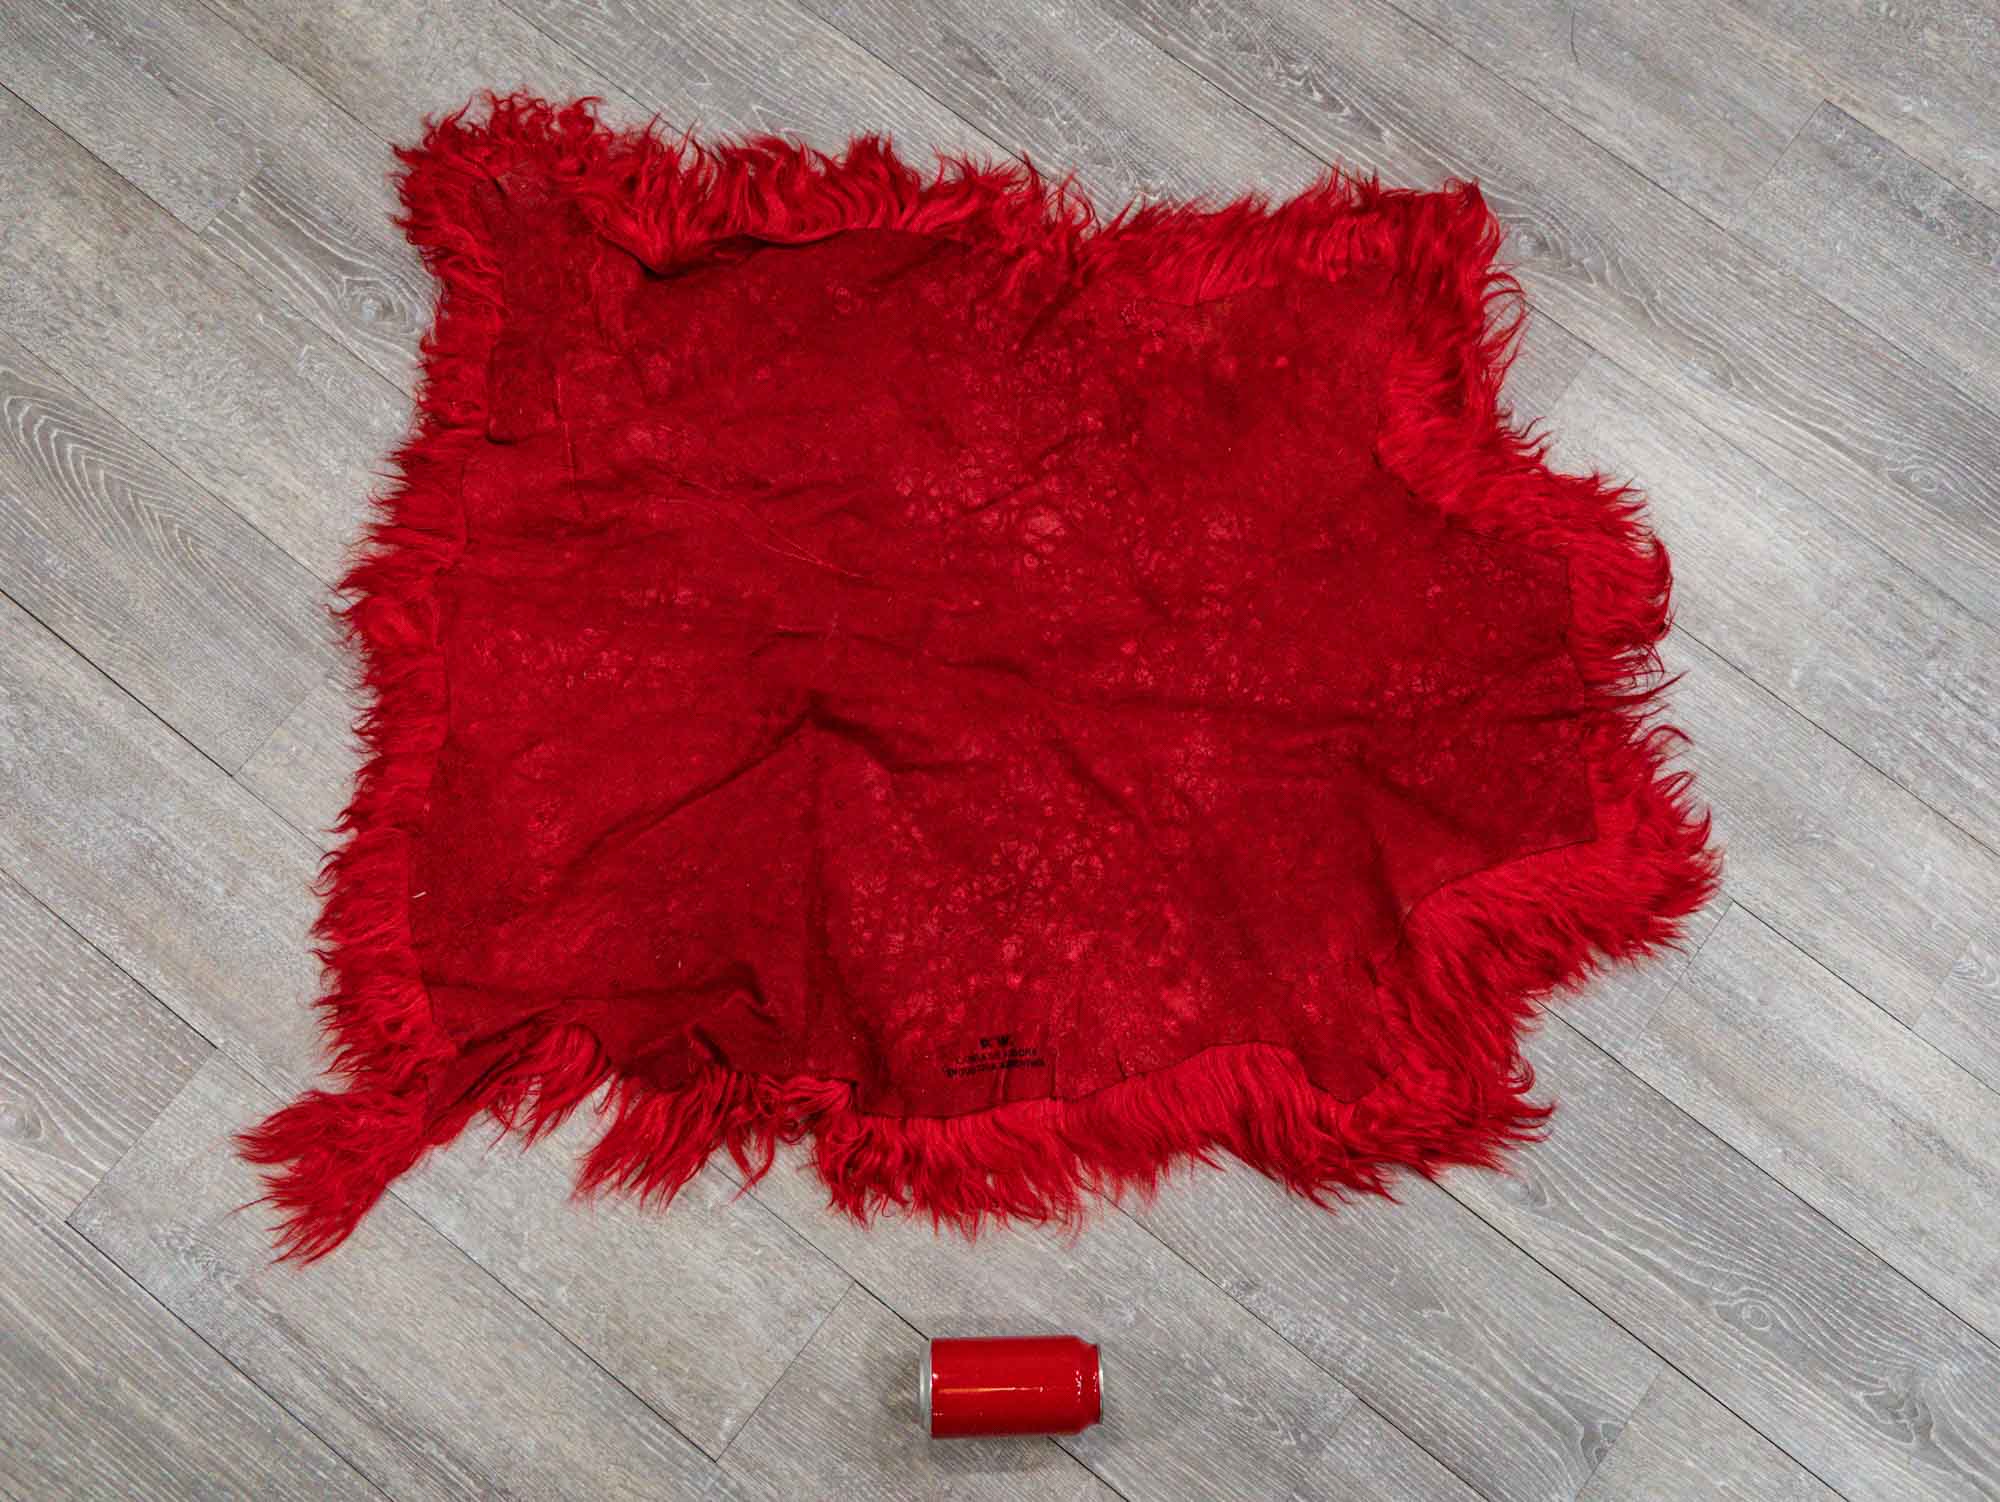 Dyed Angora Goatskin: #1: Extra Large: Red: Gallery Item - 66-A1XL-RD-G4981 (10UB06)